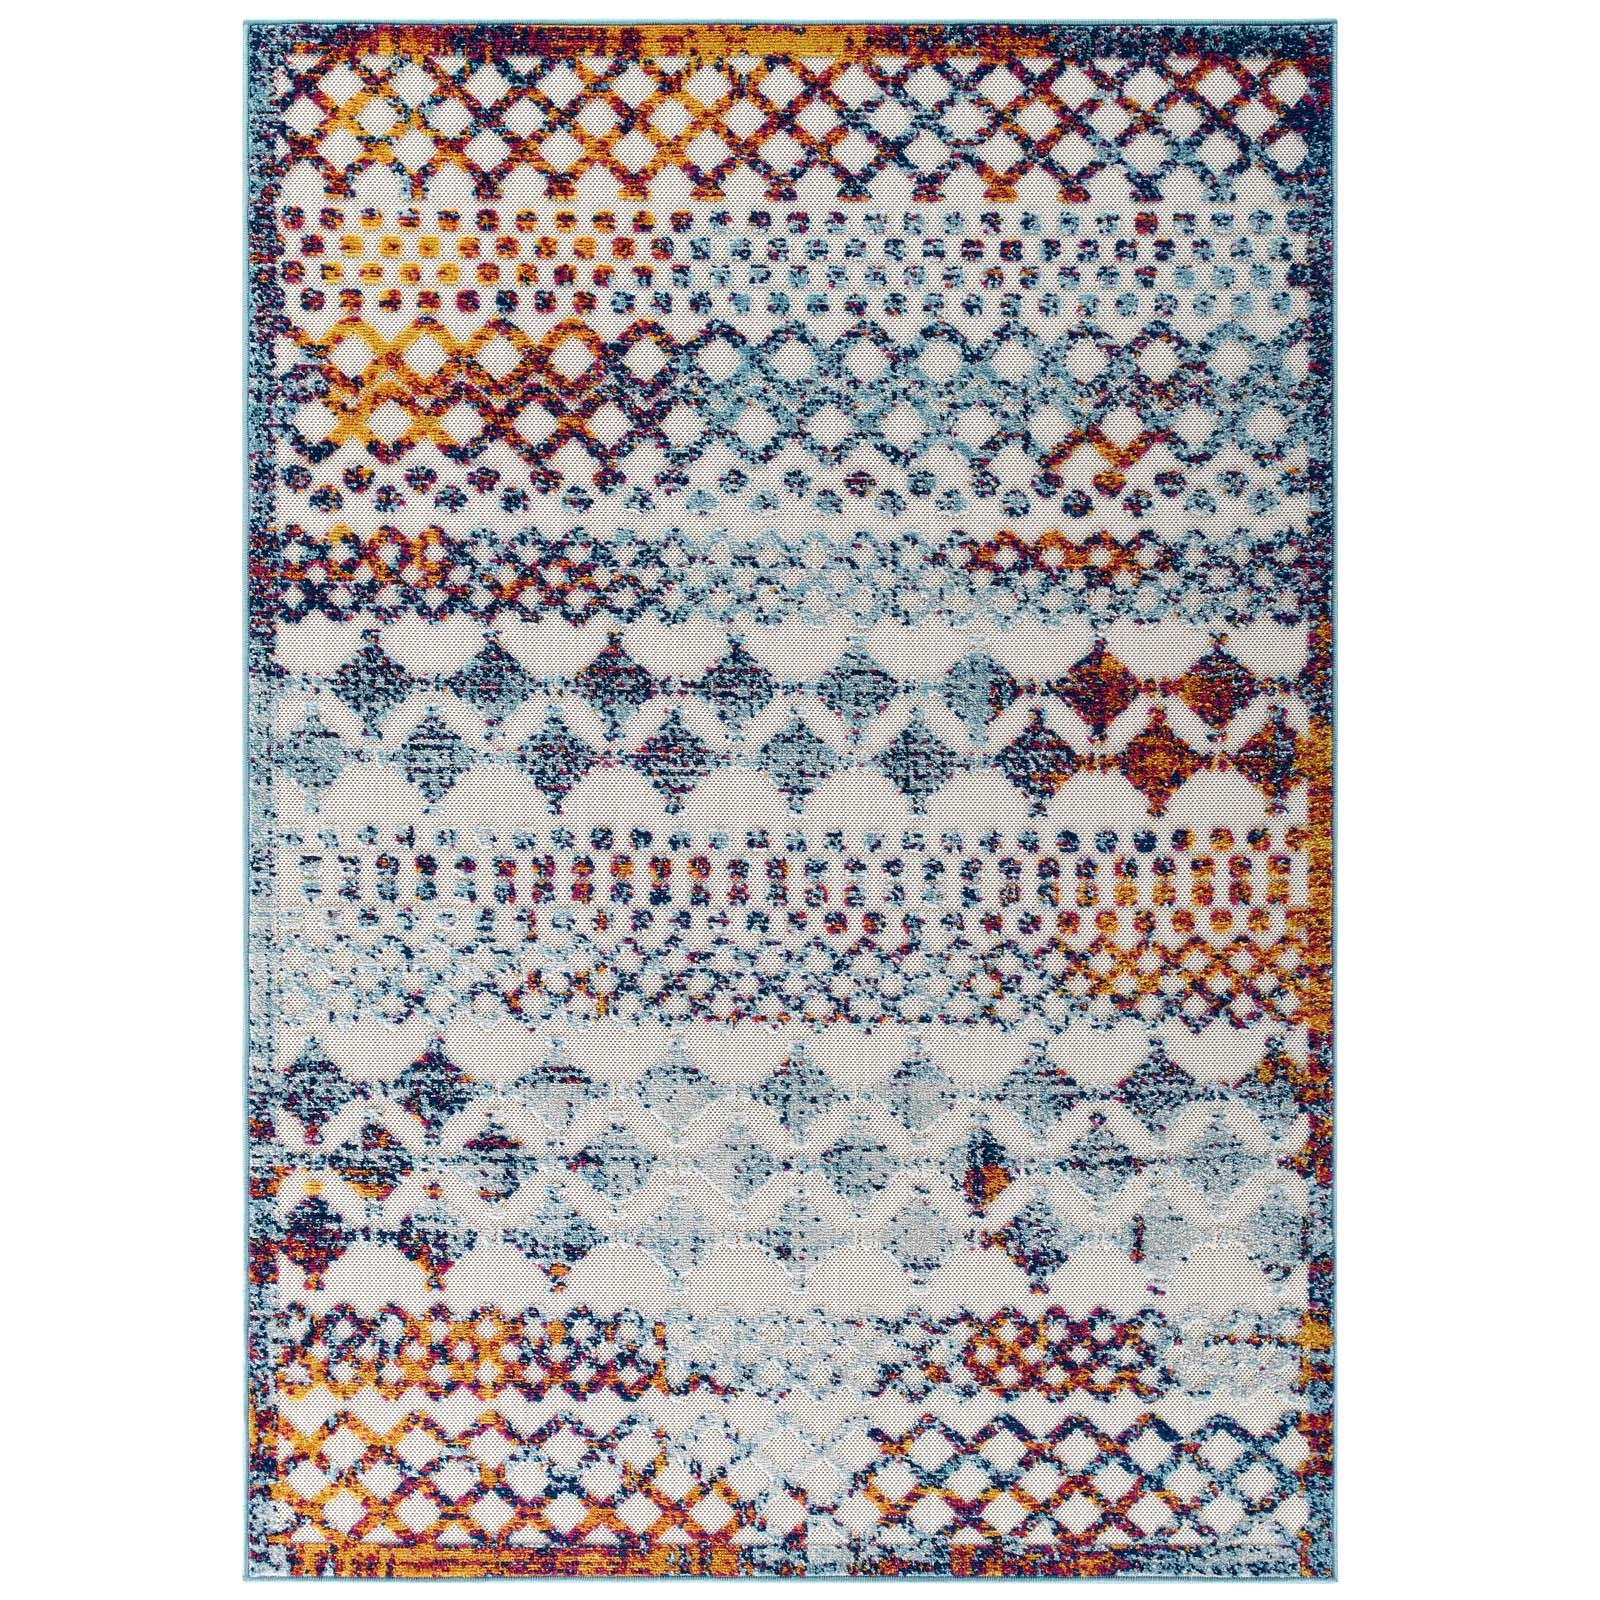 Modway Outdoor Rugs - Reflect Giada Abstract 5x8 Indoor/Outdoor Area Rug Multicolored